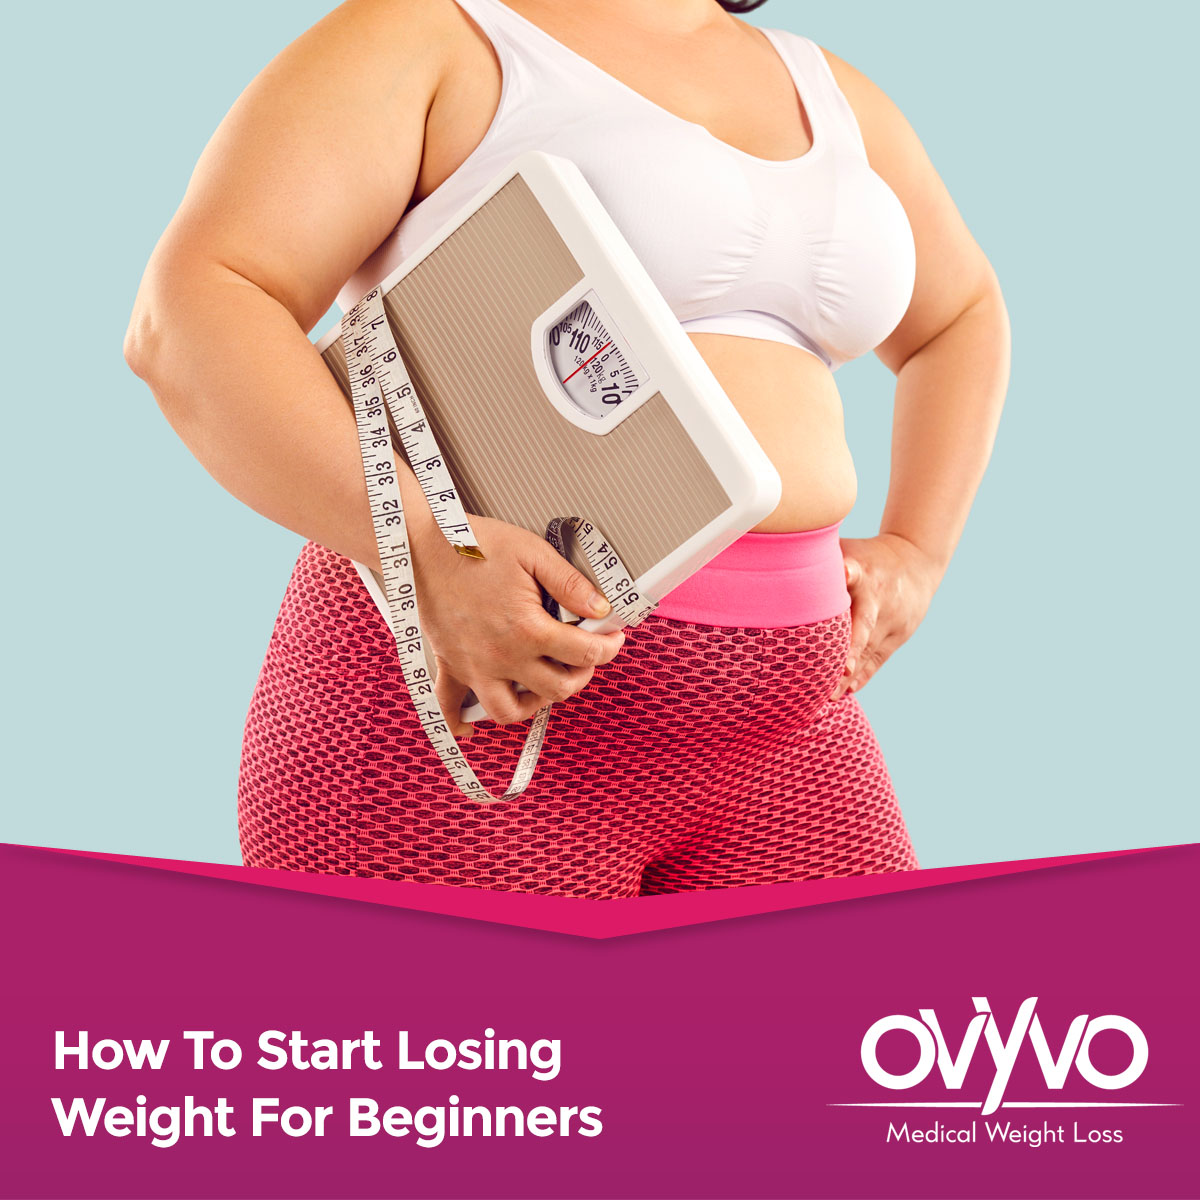 How To Start Losing Weight For Beginners